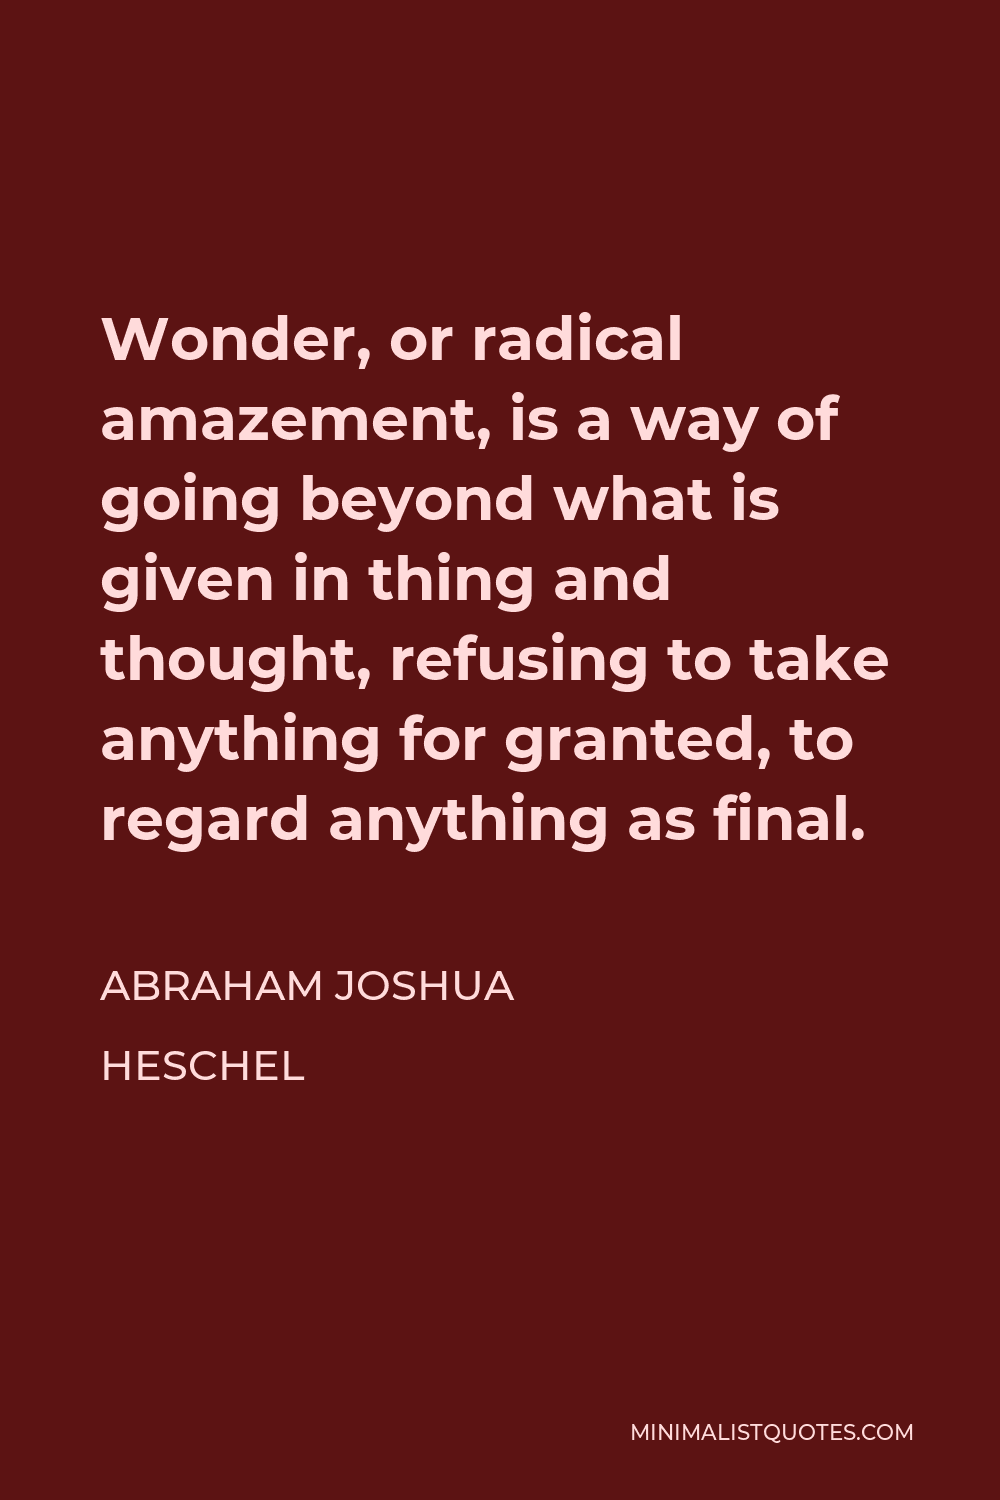 Abraham Joshua Heschel Quote - Wonder, or radical amazement, is a way of going beyond what is given in thing and thought, refusing to take anything for granted, to regard anything as final.